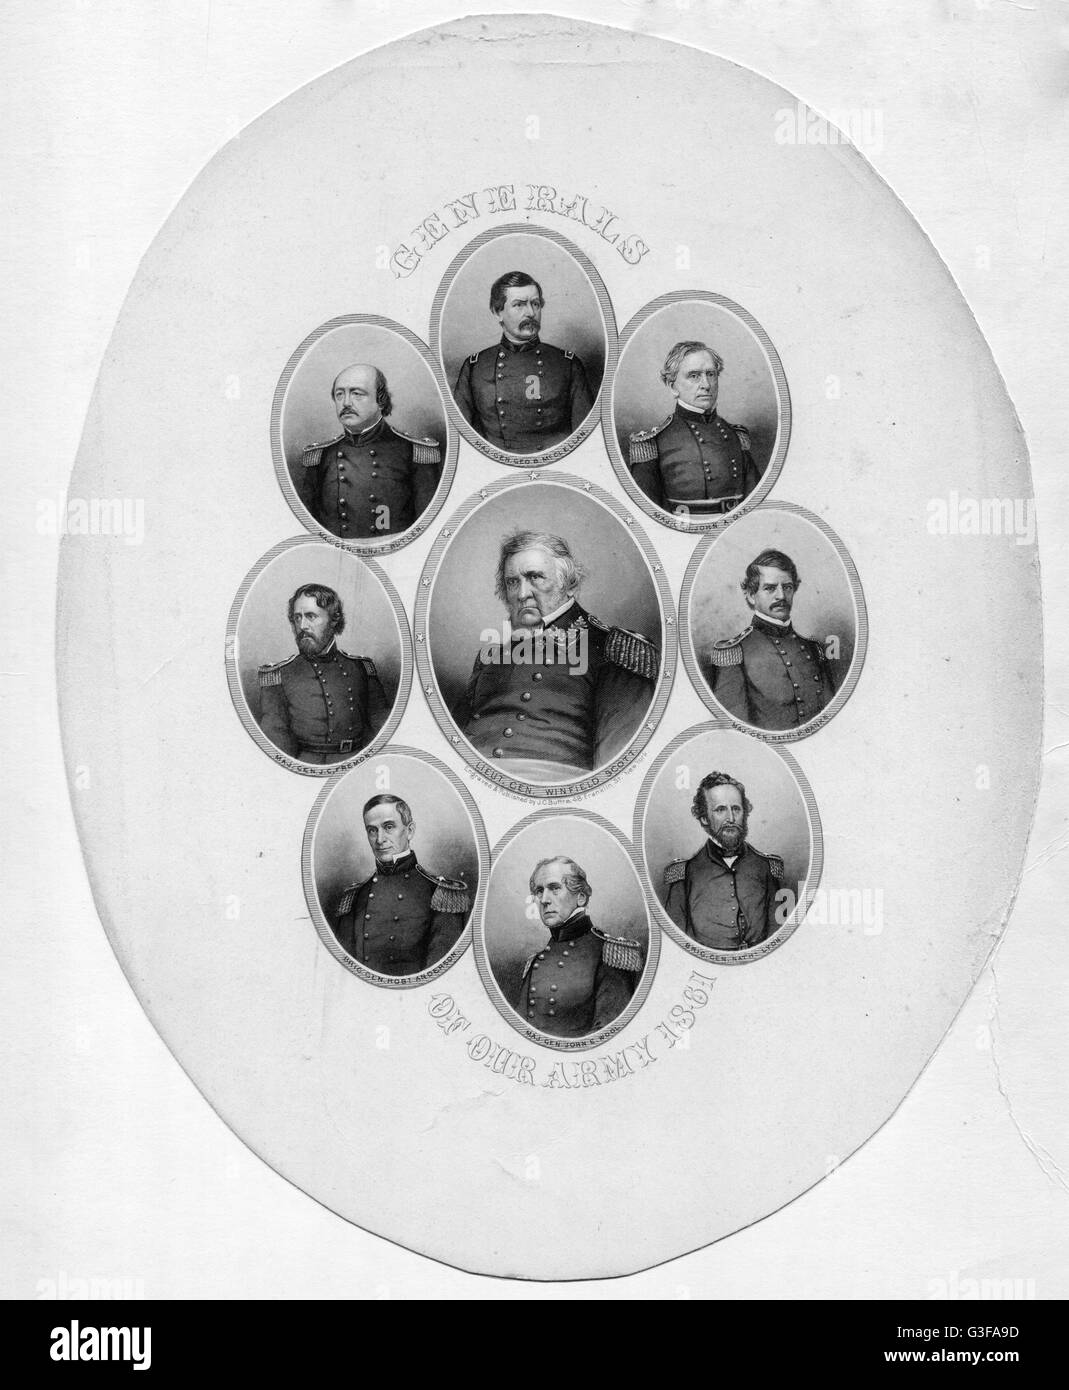 Generals of the Union Army - Clockwise, from top: McClellan, Dix, Banks, Lyon, Wool, Anderson, Fremont, Butler. Center: Winfield Scott. Stock Photo